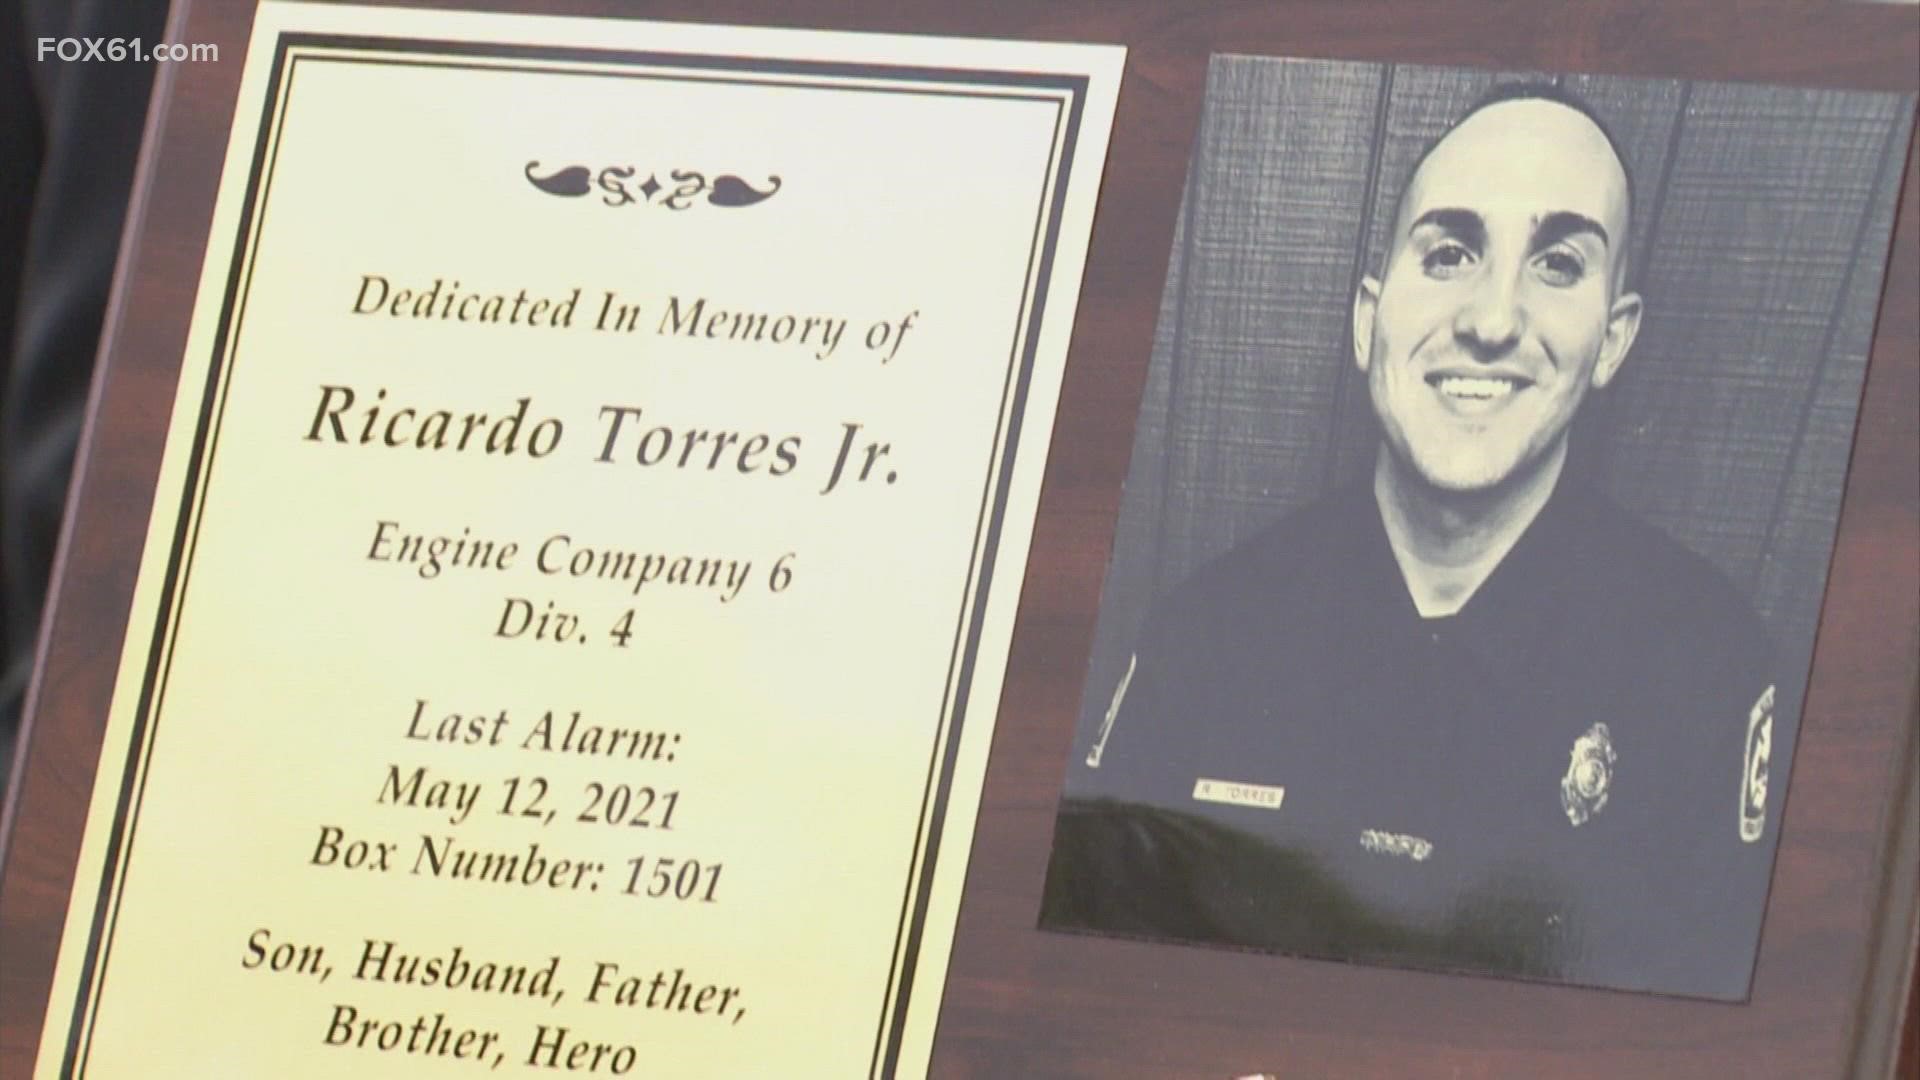 Ricardo Torres Jr. lost his life fighting a house fire